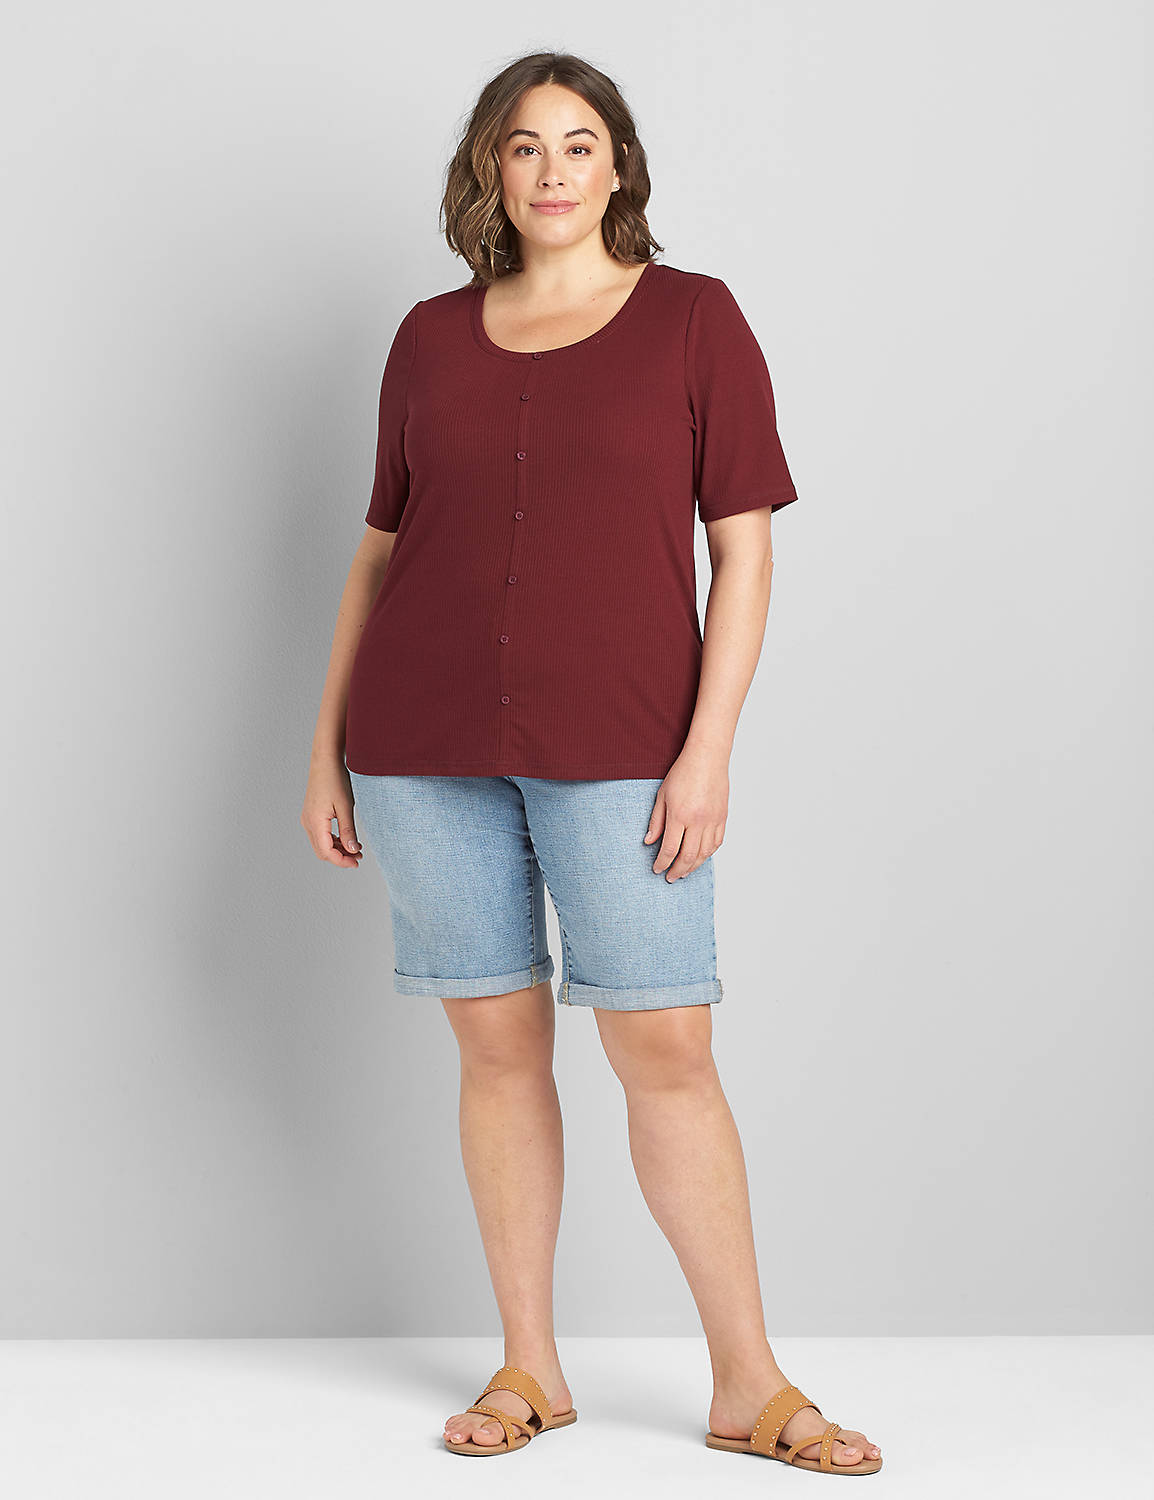 Perfect Sleeve Open Scoop Neck Ribbed Button Down Top 1121884 copy of 1121335:PANTONE Zinfandel:34/36 Product Image 3